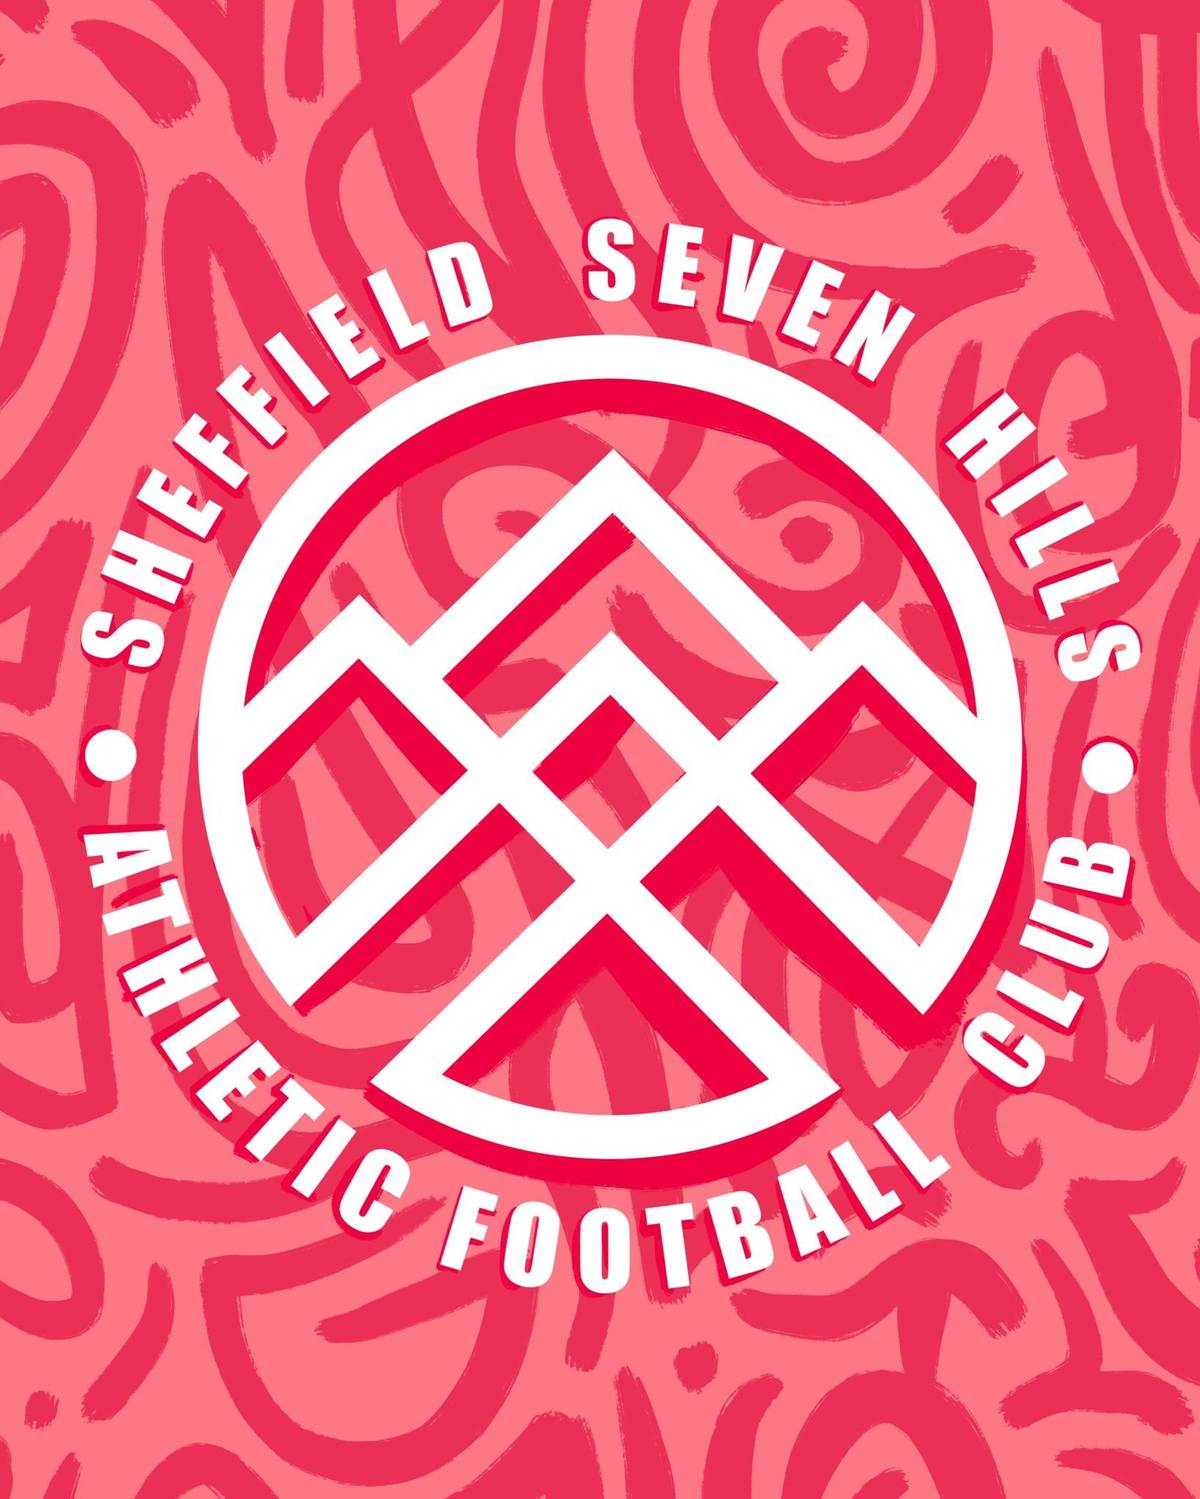 Sheffield Seven Hills AFC Club badge with new away kit pink colors